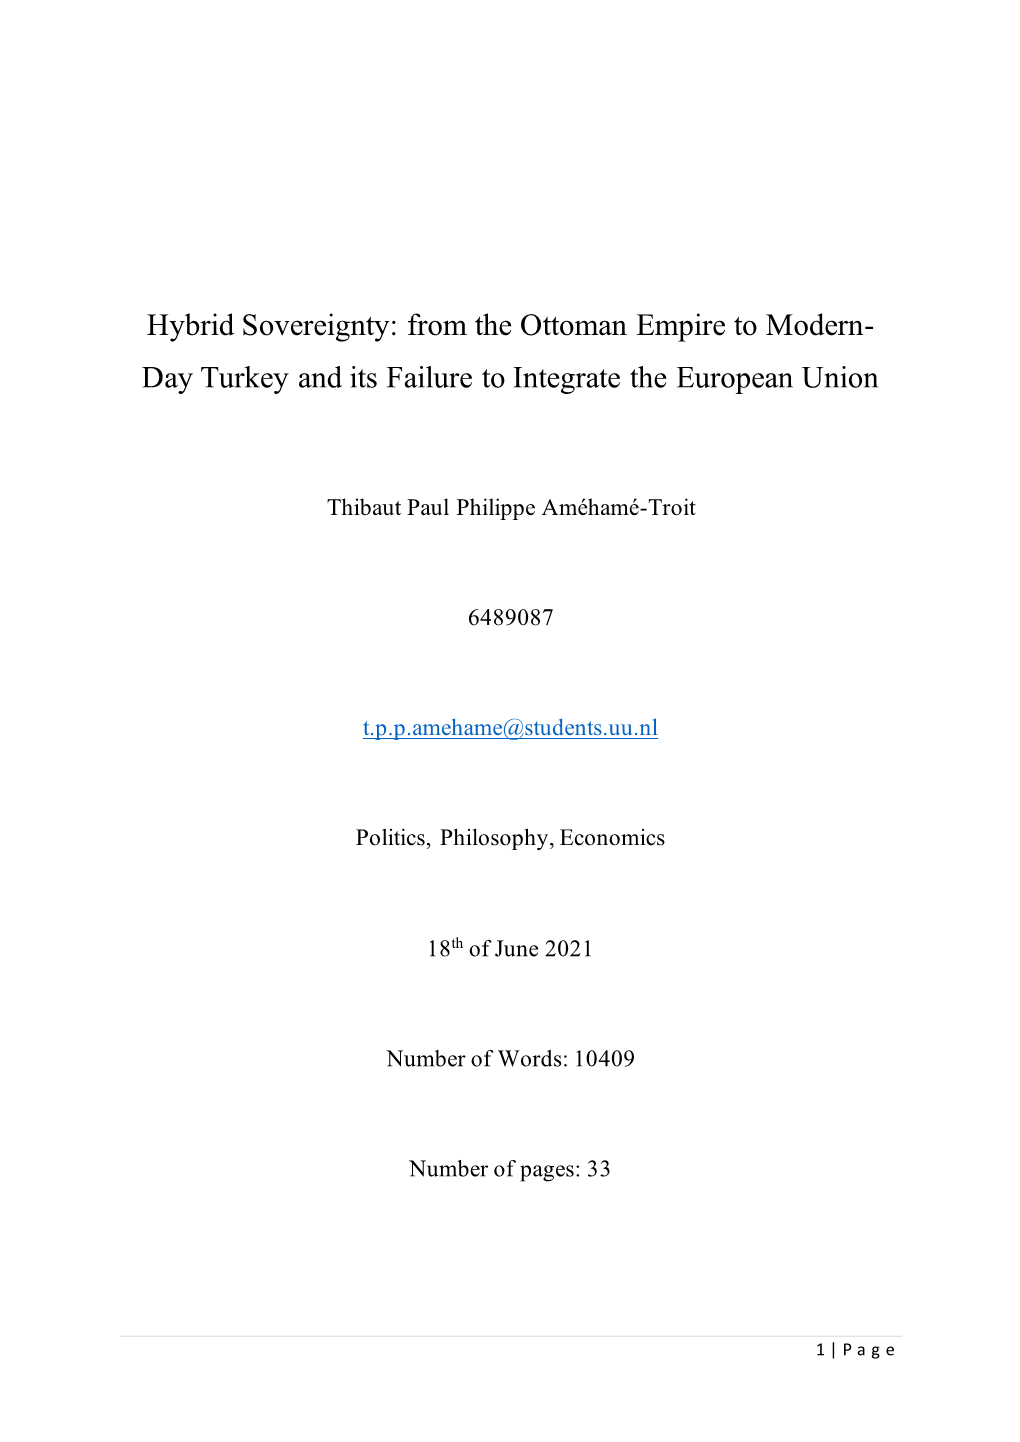 Hybrid Sovereignty: from the Ottoman Empire to Modern- Day Turkey and Its Failure to Integrate the European Union